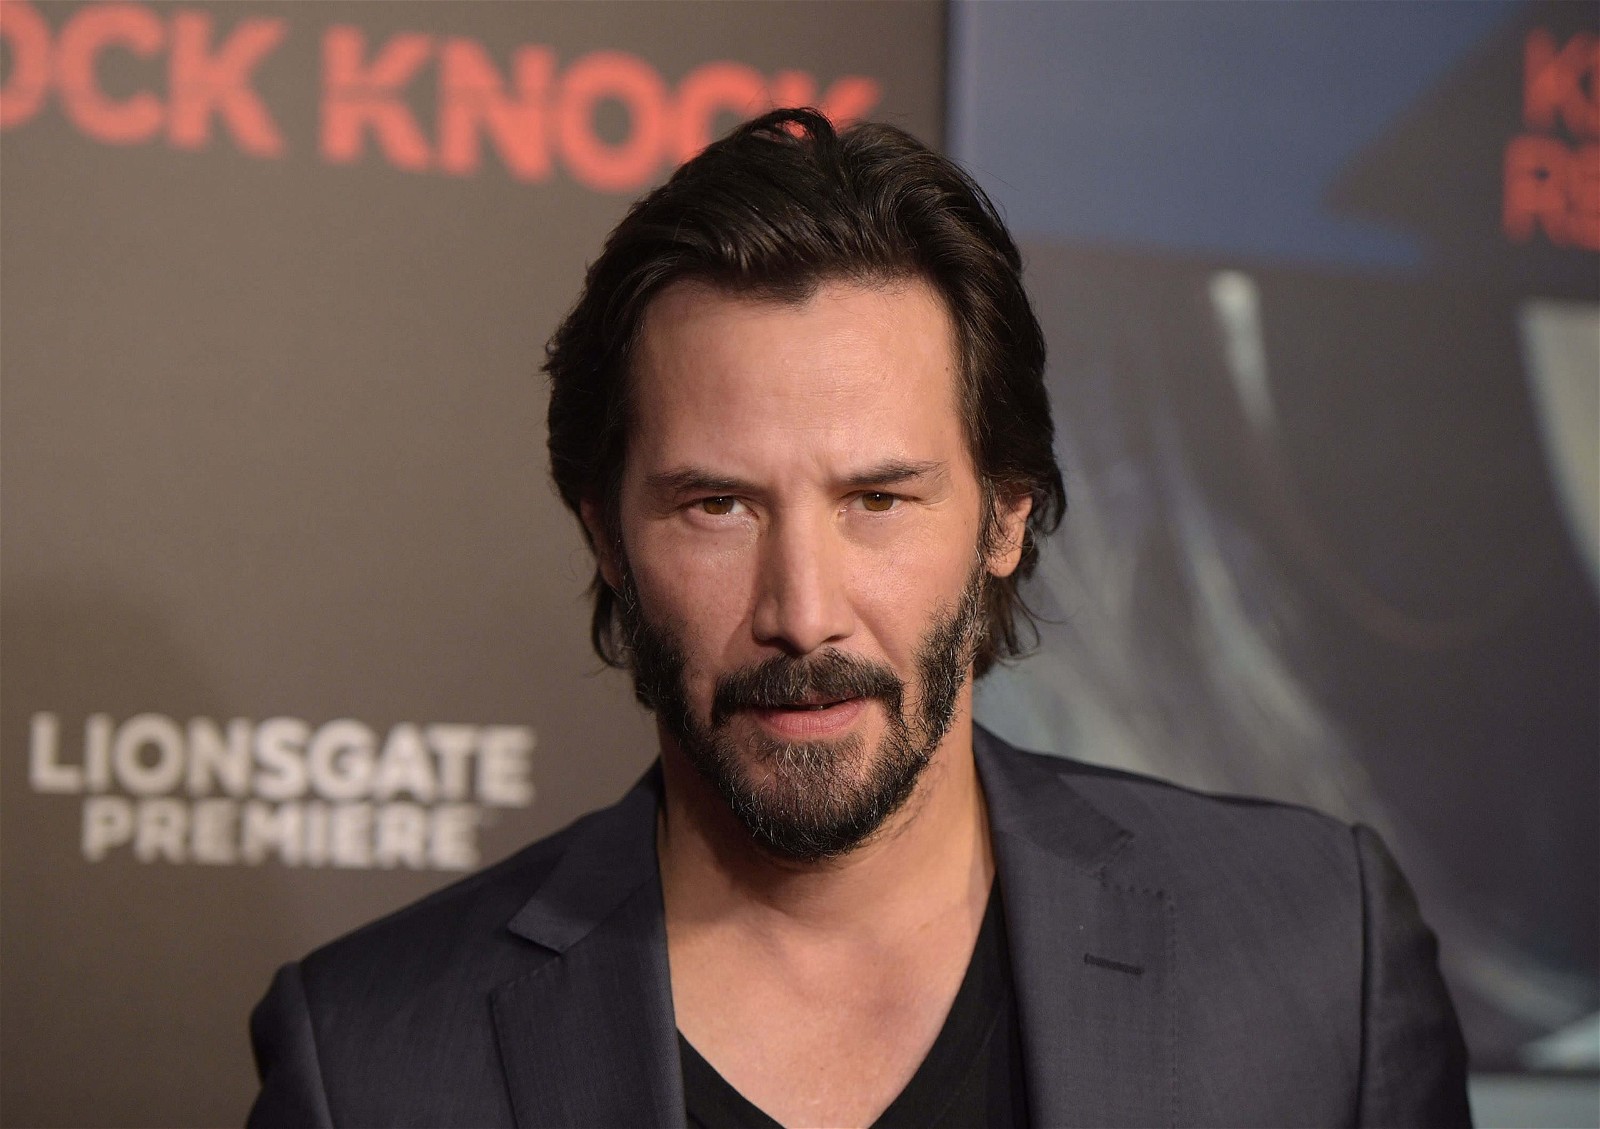 Keanu Reeves at Lionsgate event